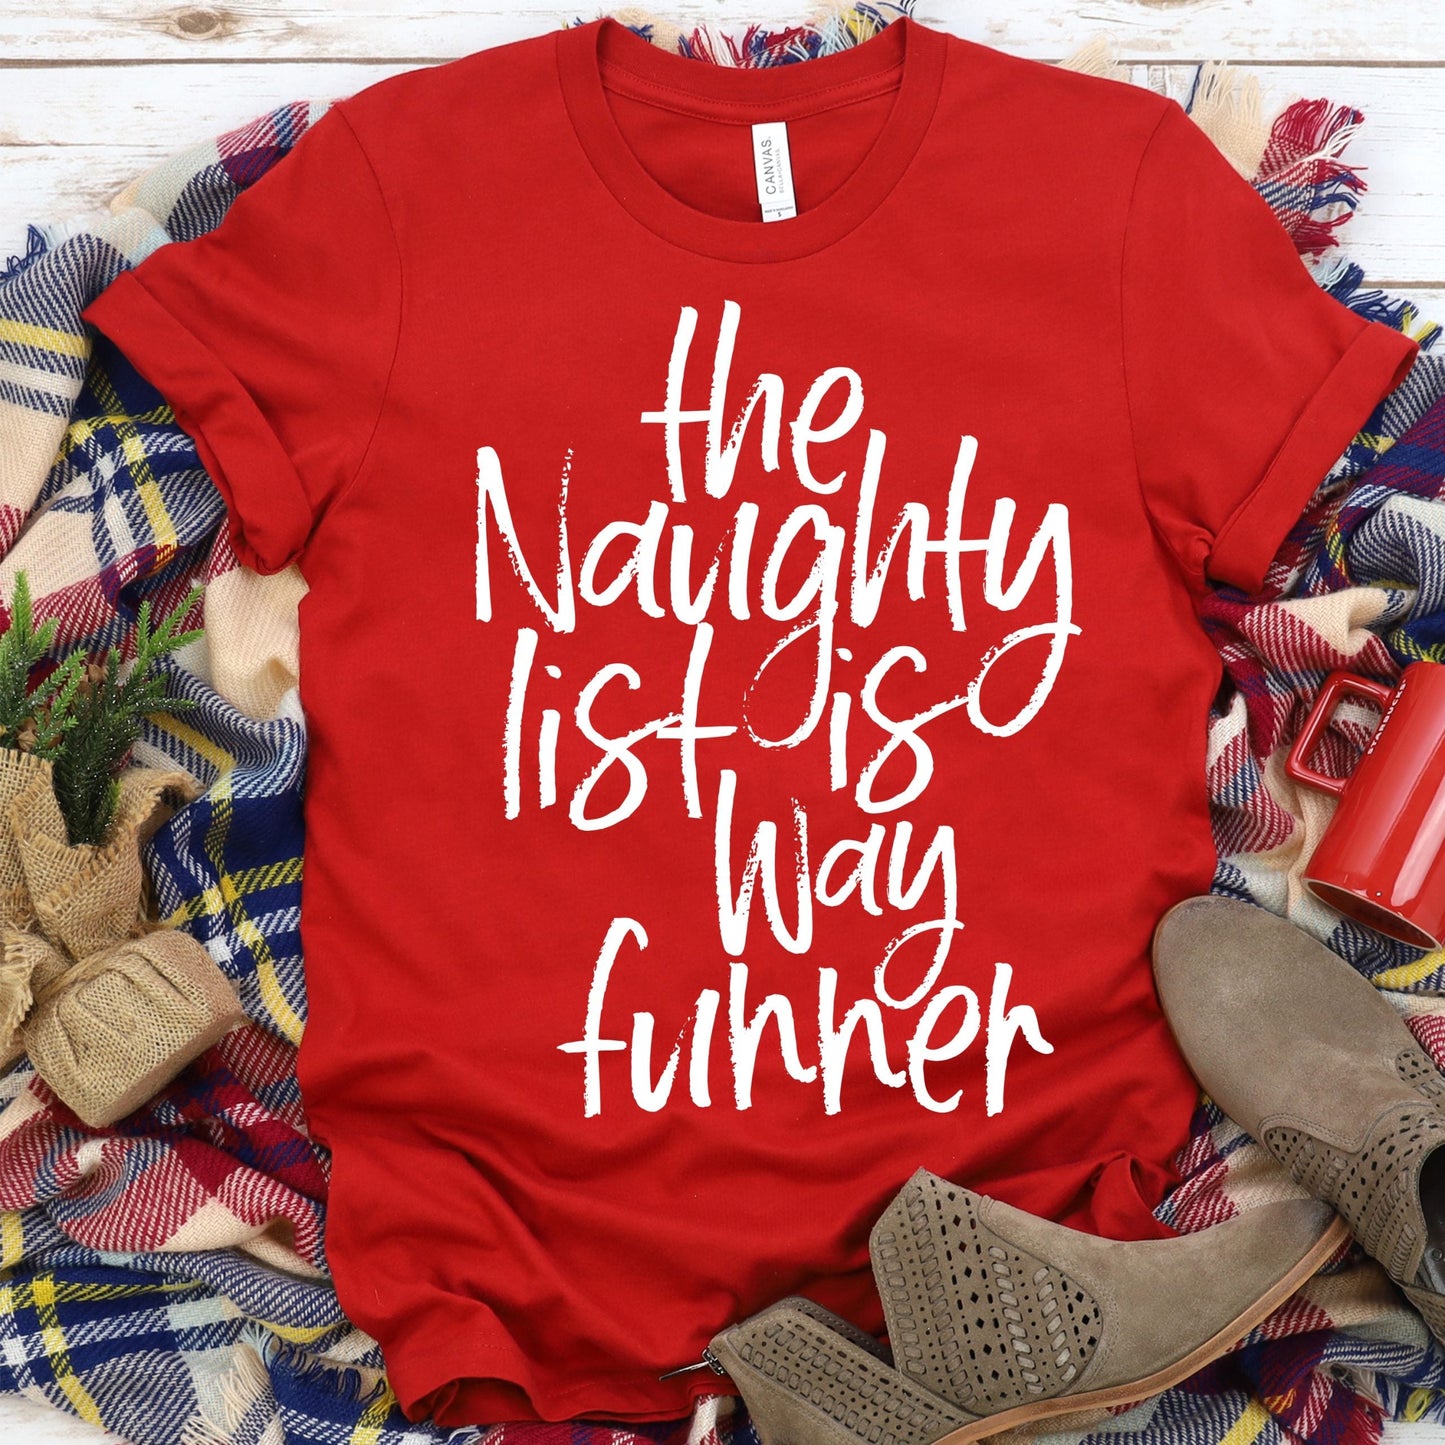 The Naughty List was Funner